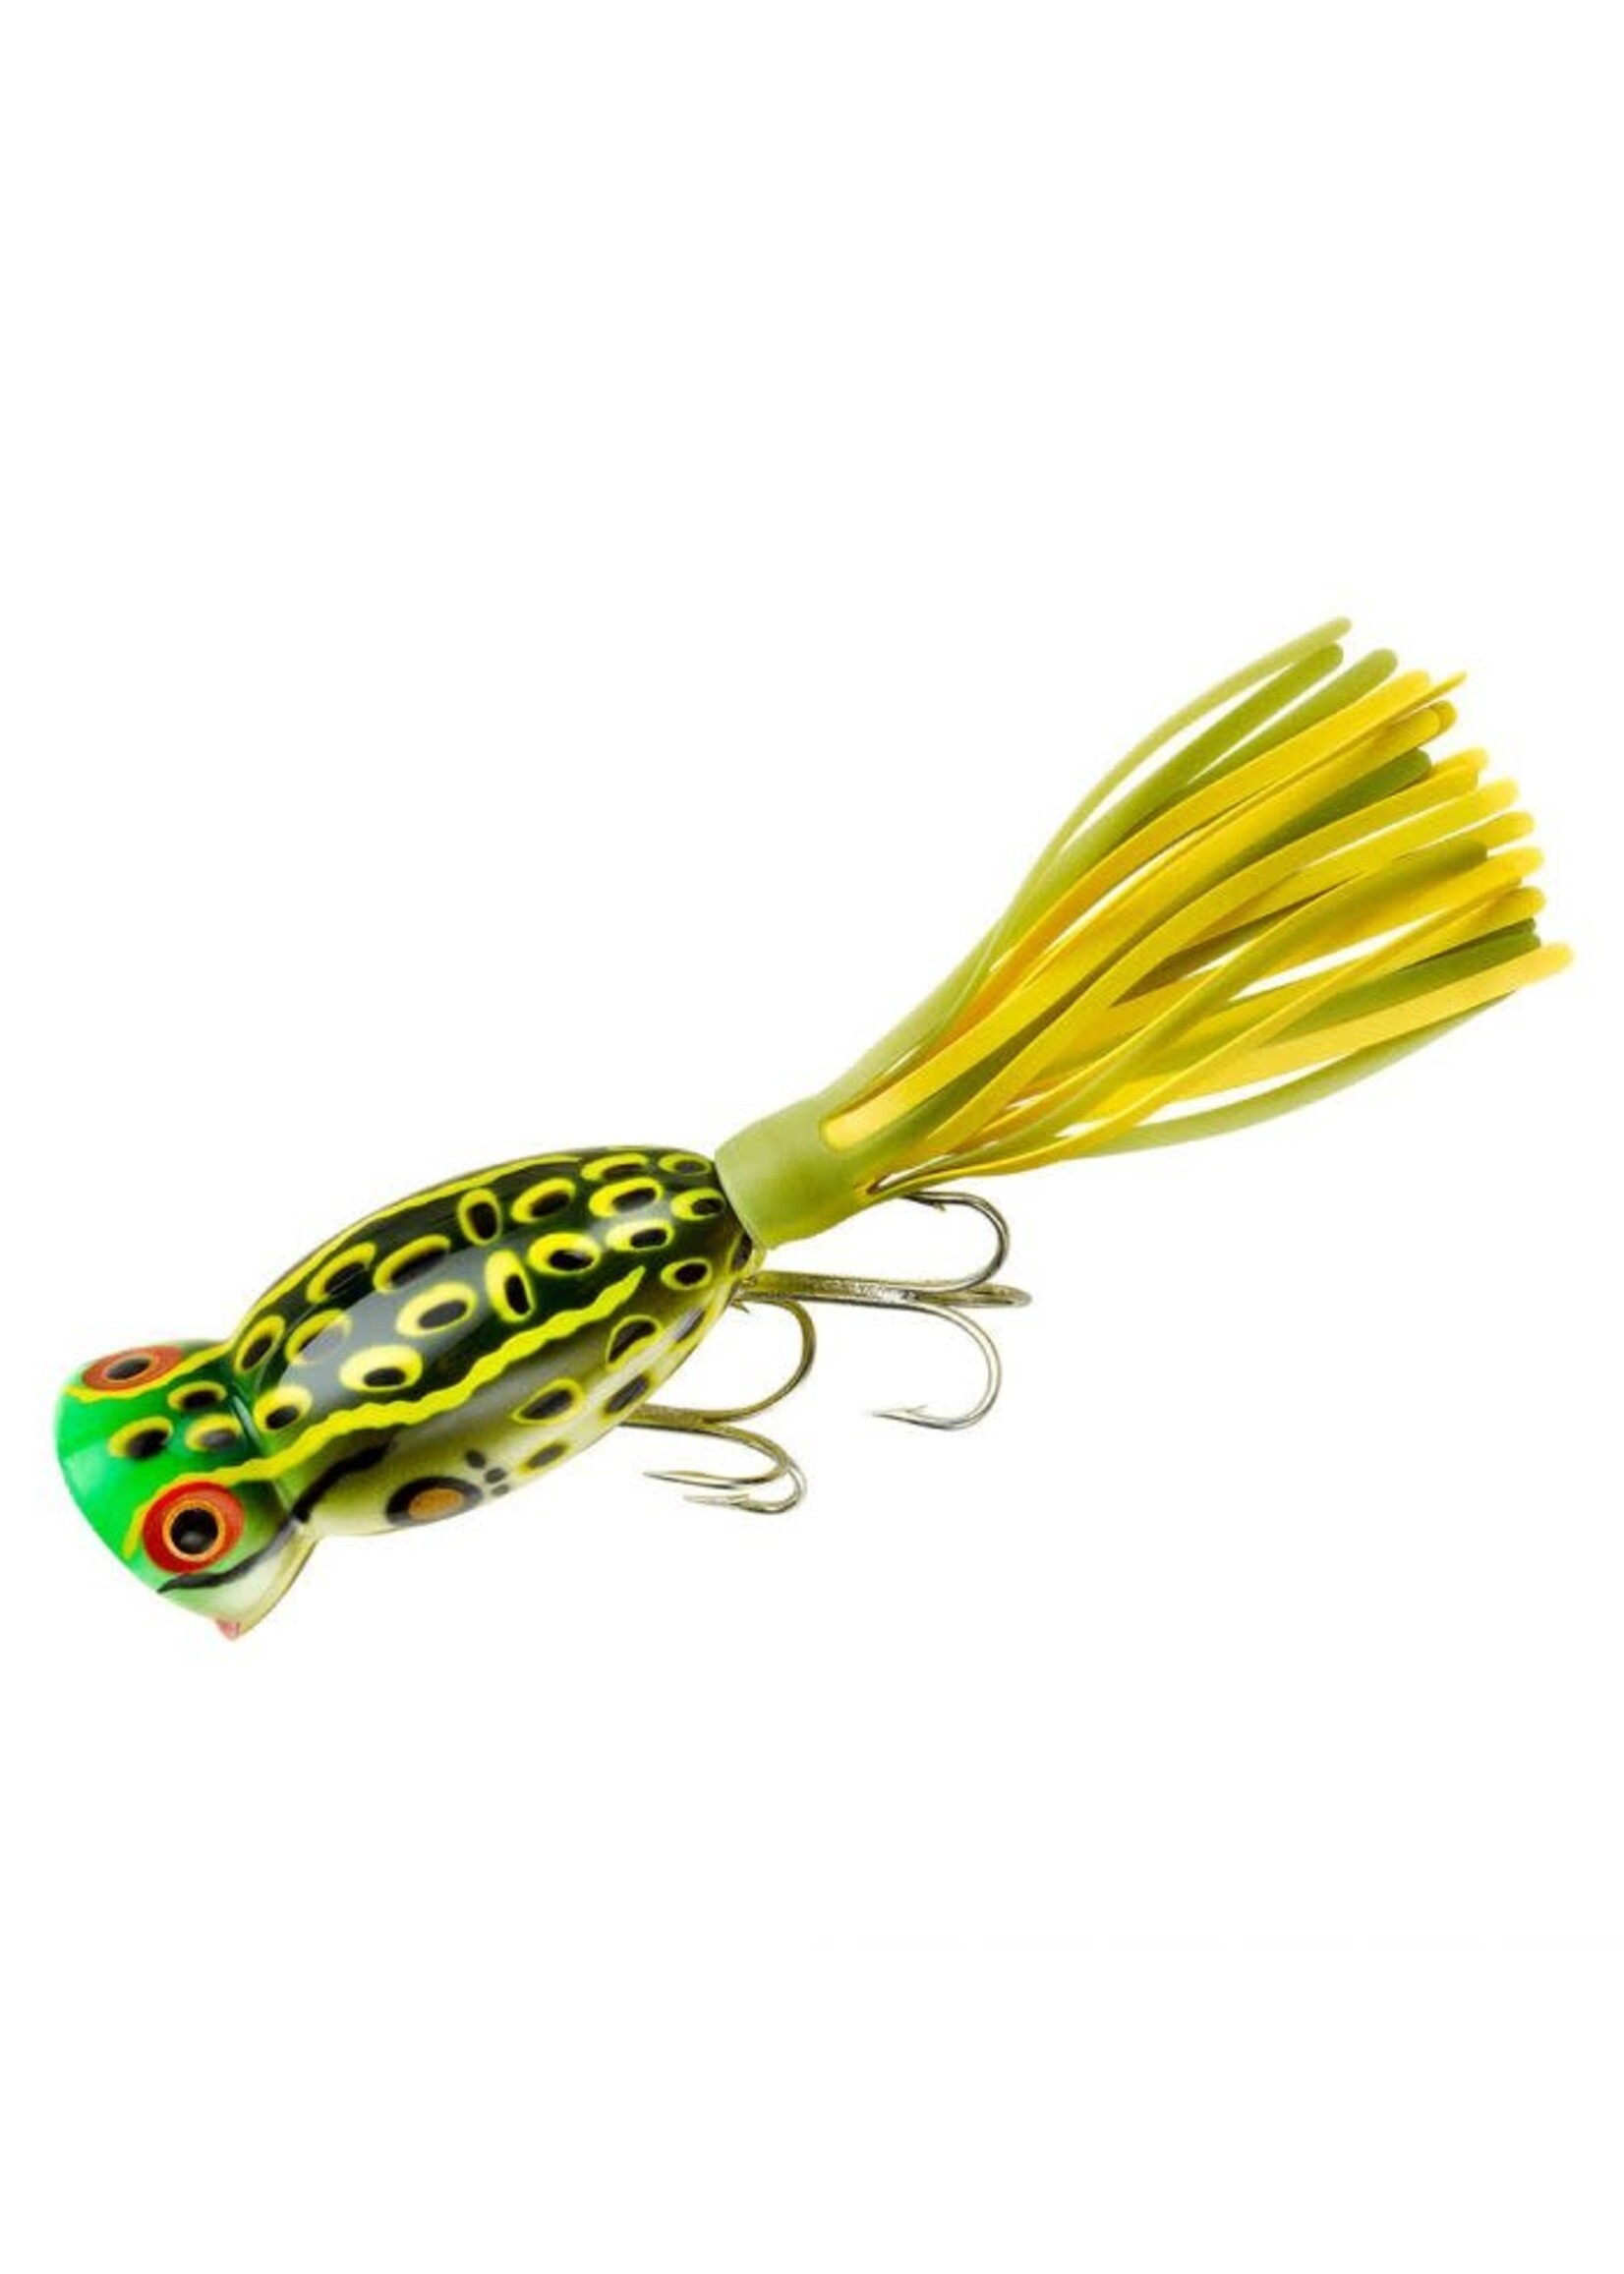 Arbogast 1/4oz Hula Popper G770 Topwater Lure in Color Coach Dog